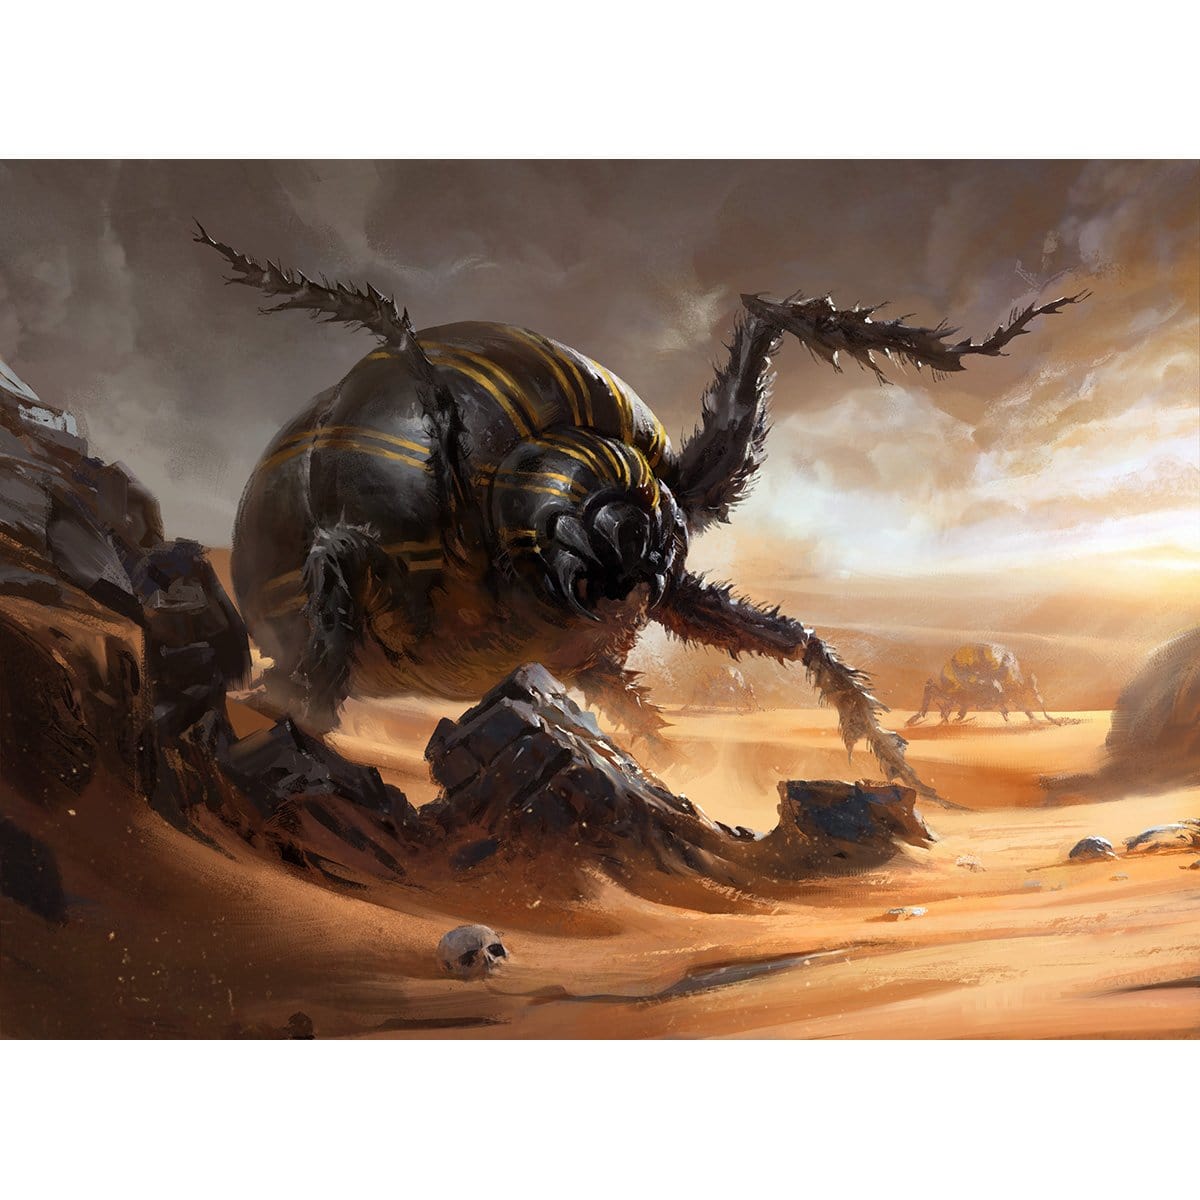 Dune Beetle Print - Print - Original Magic Art - Accessories for Magic the Gathering and other card games